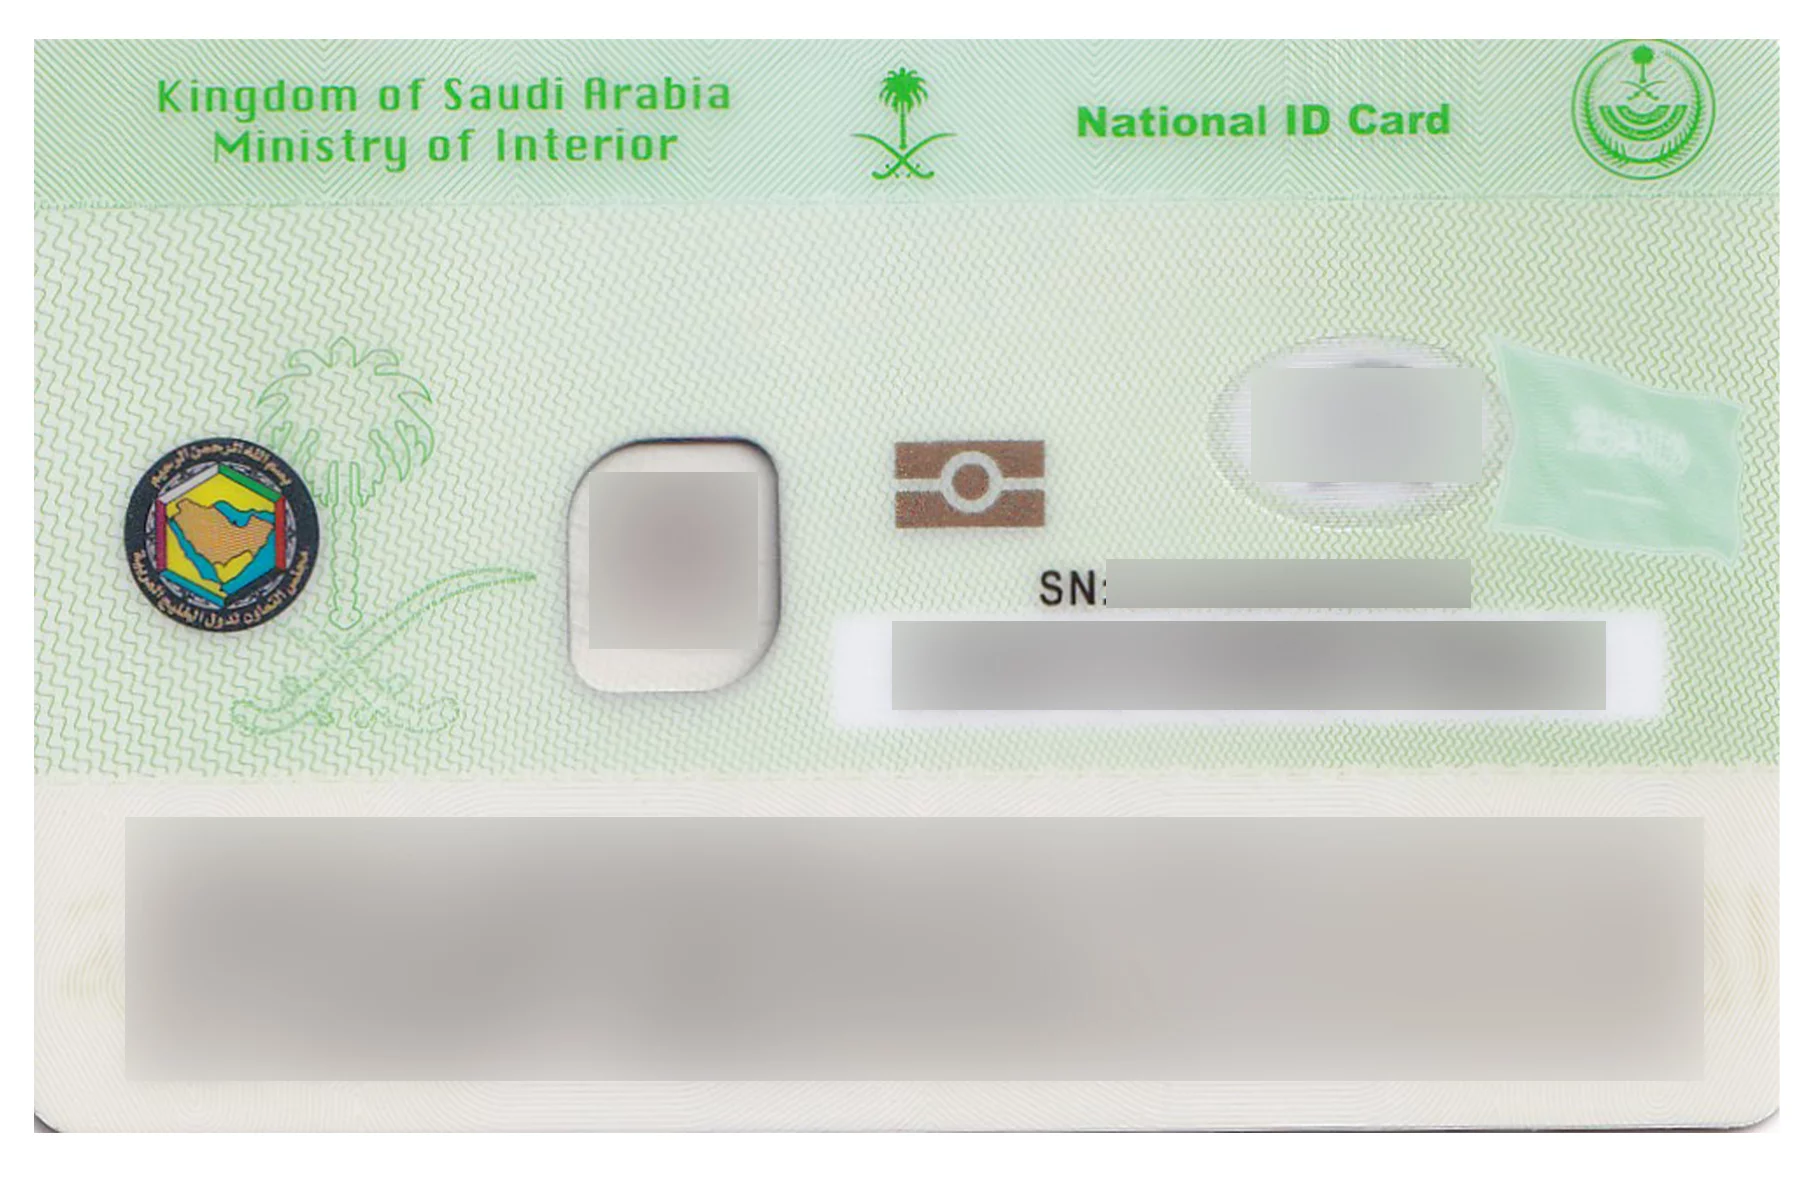 Example of a Saudi national ID card